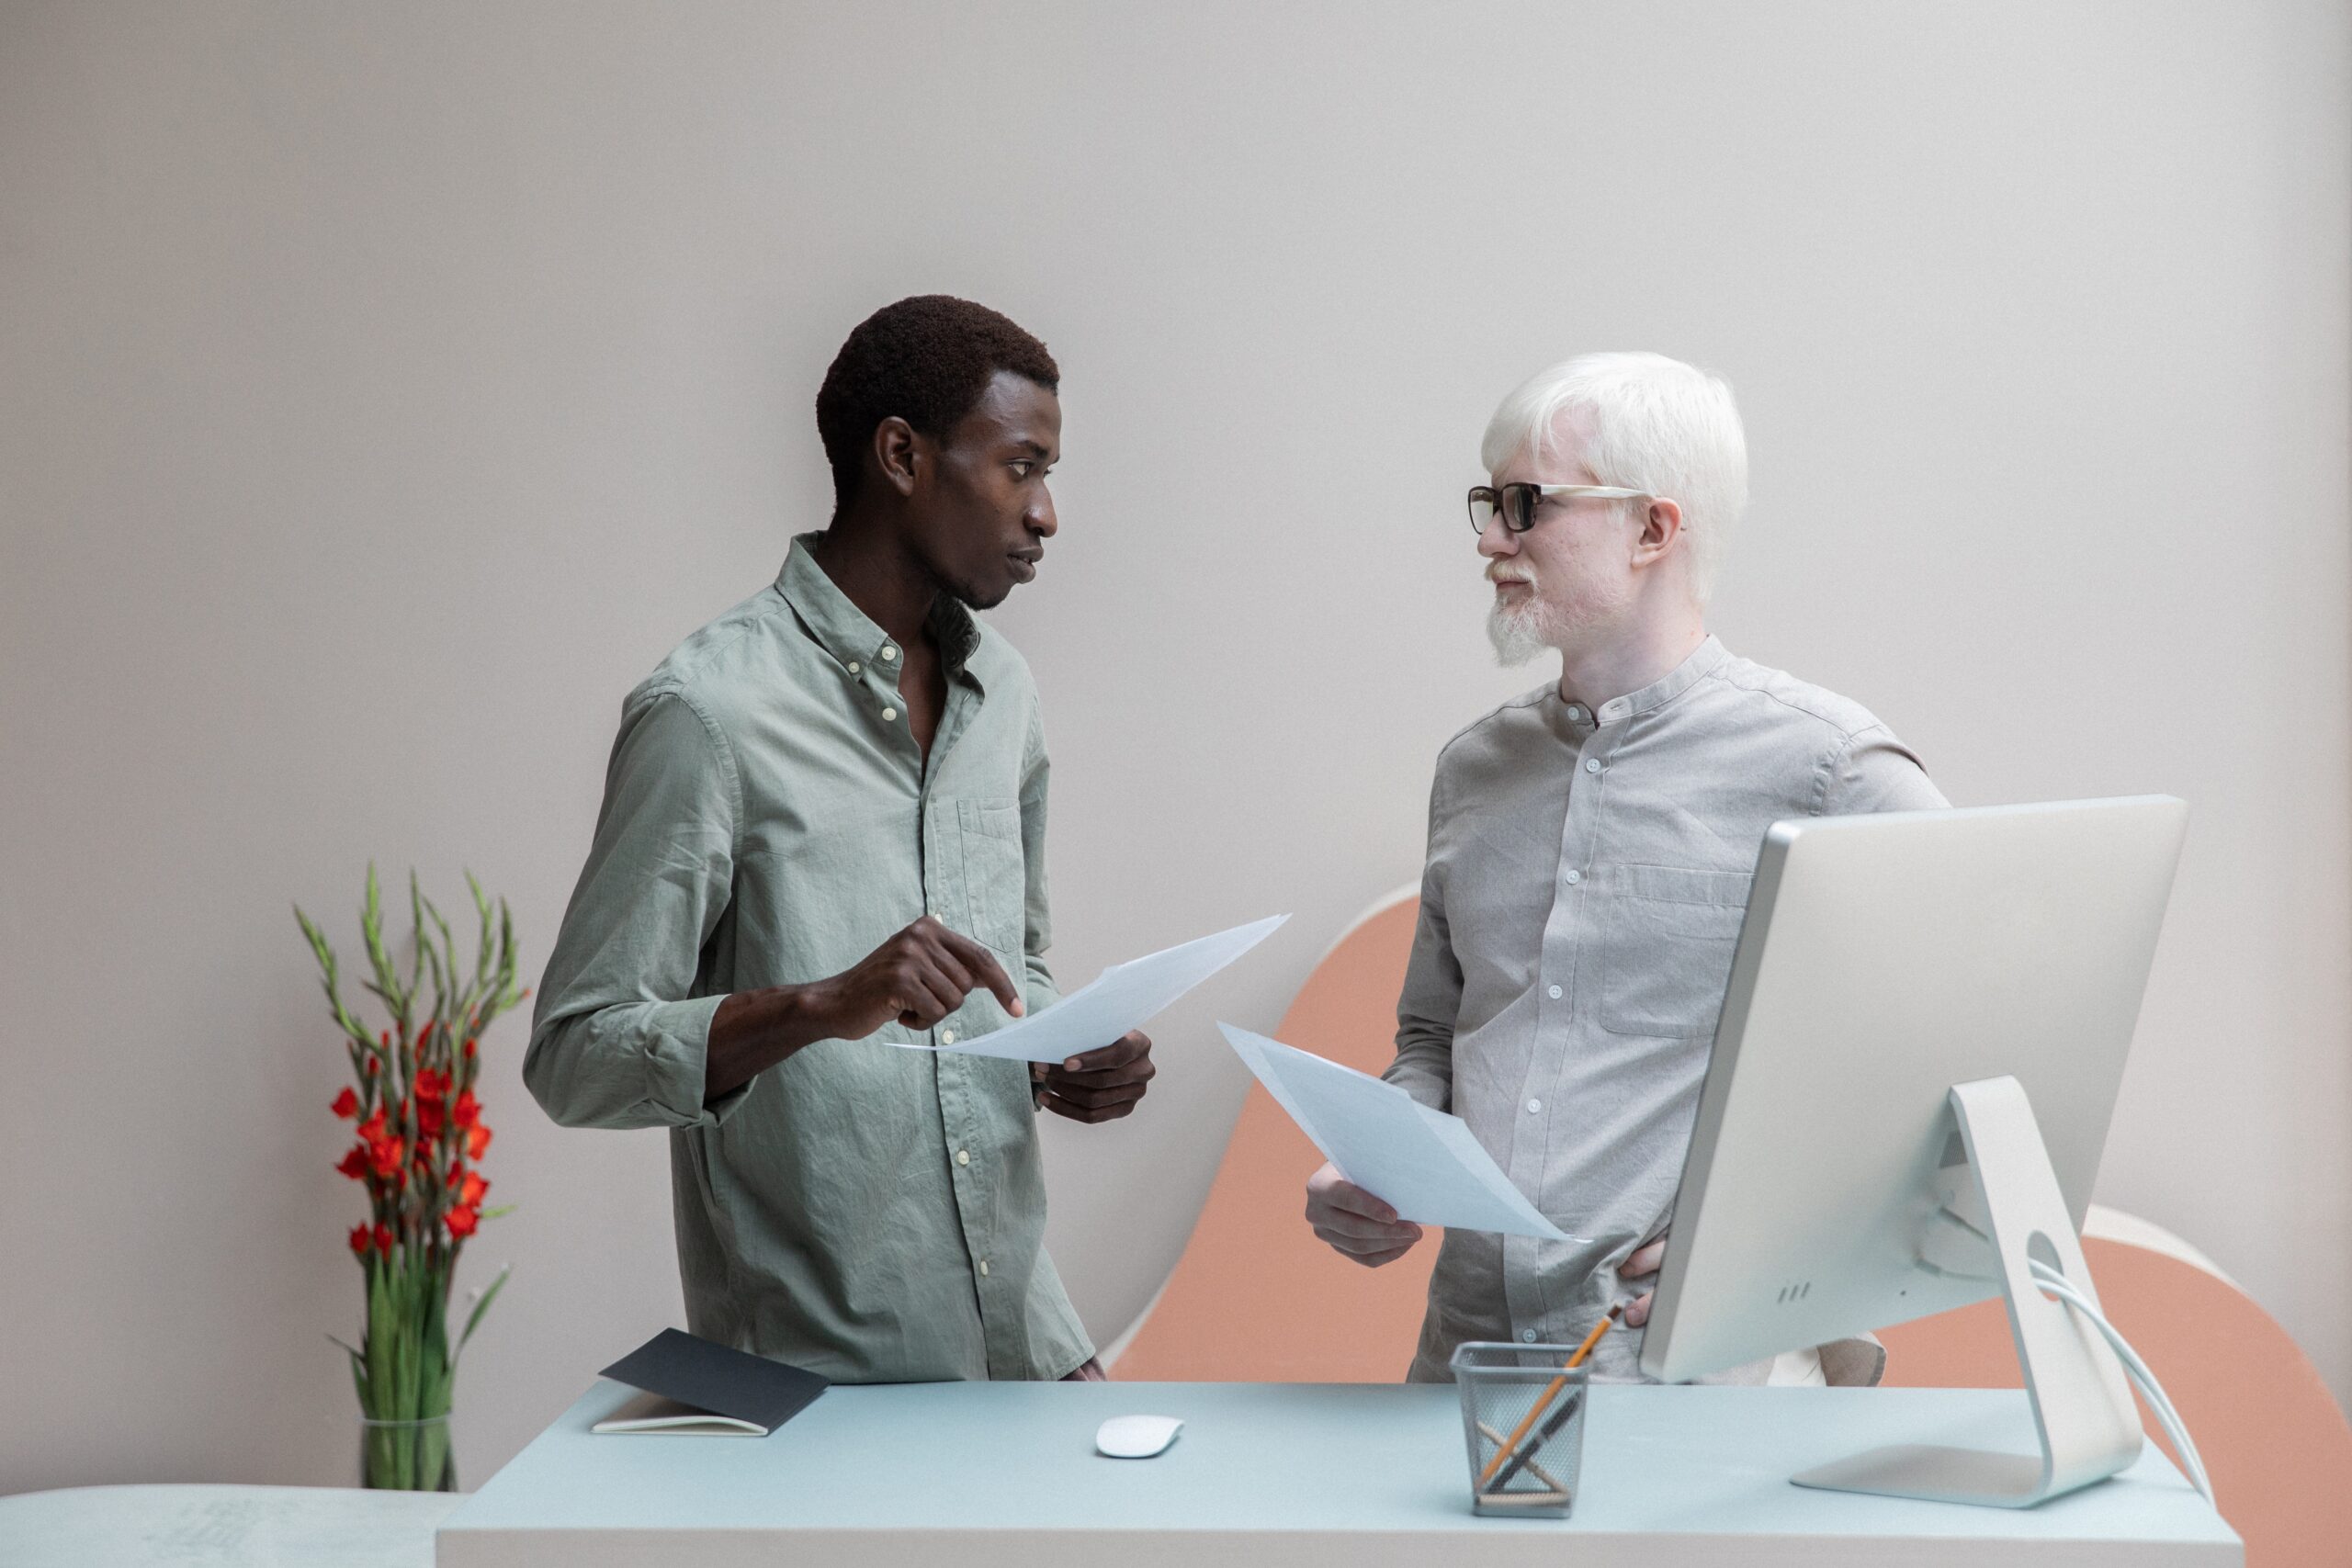 : Two people standing next to each other in an office setting. There is a white desk with a computer in front of them, and they are both holding some papers while they seem to be in a conversation.